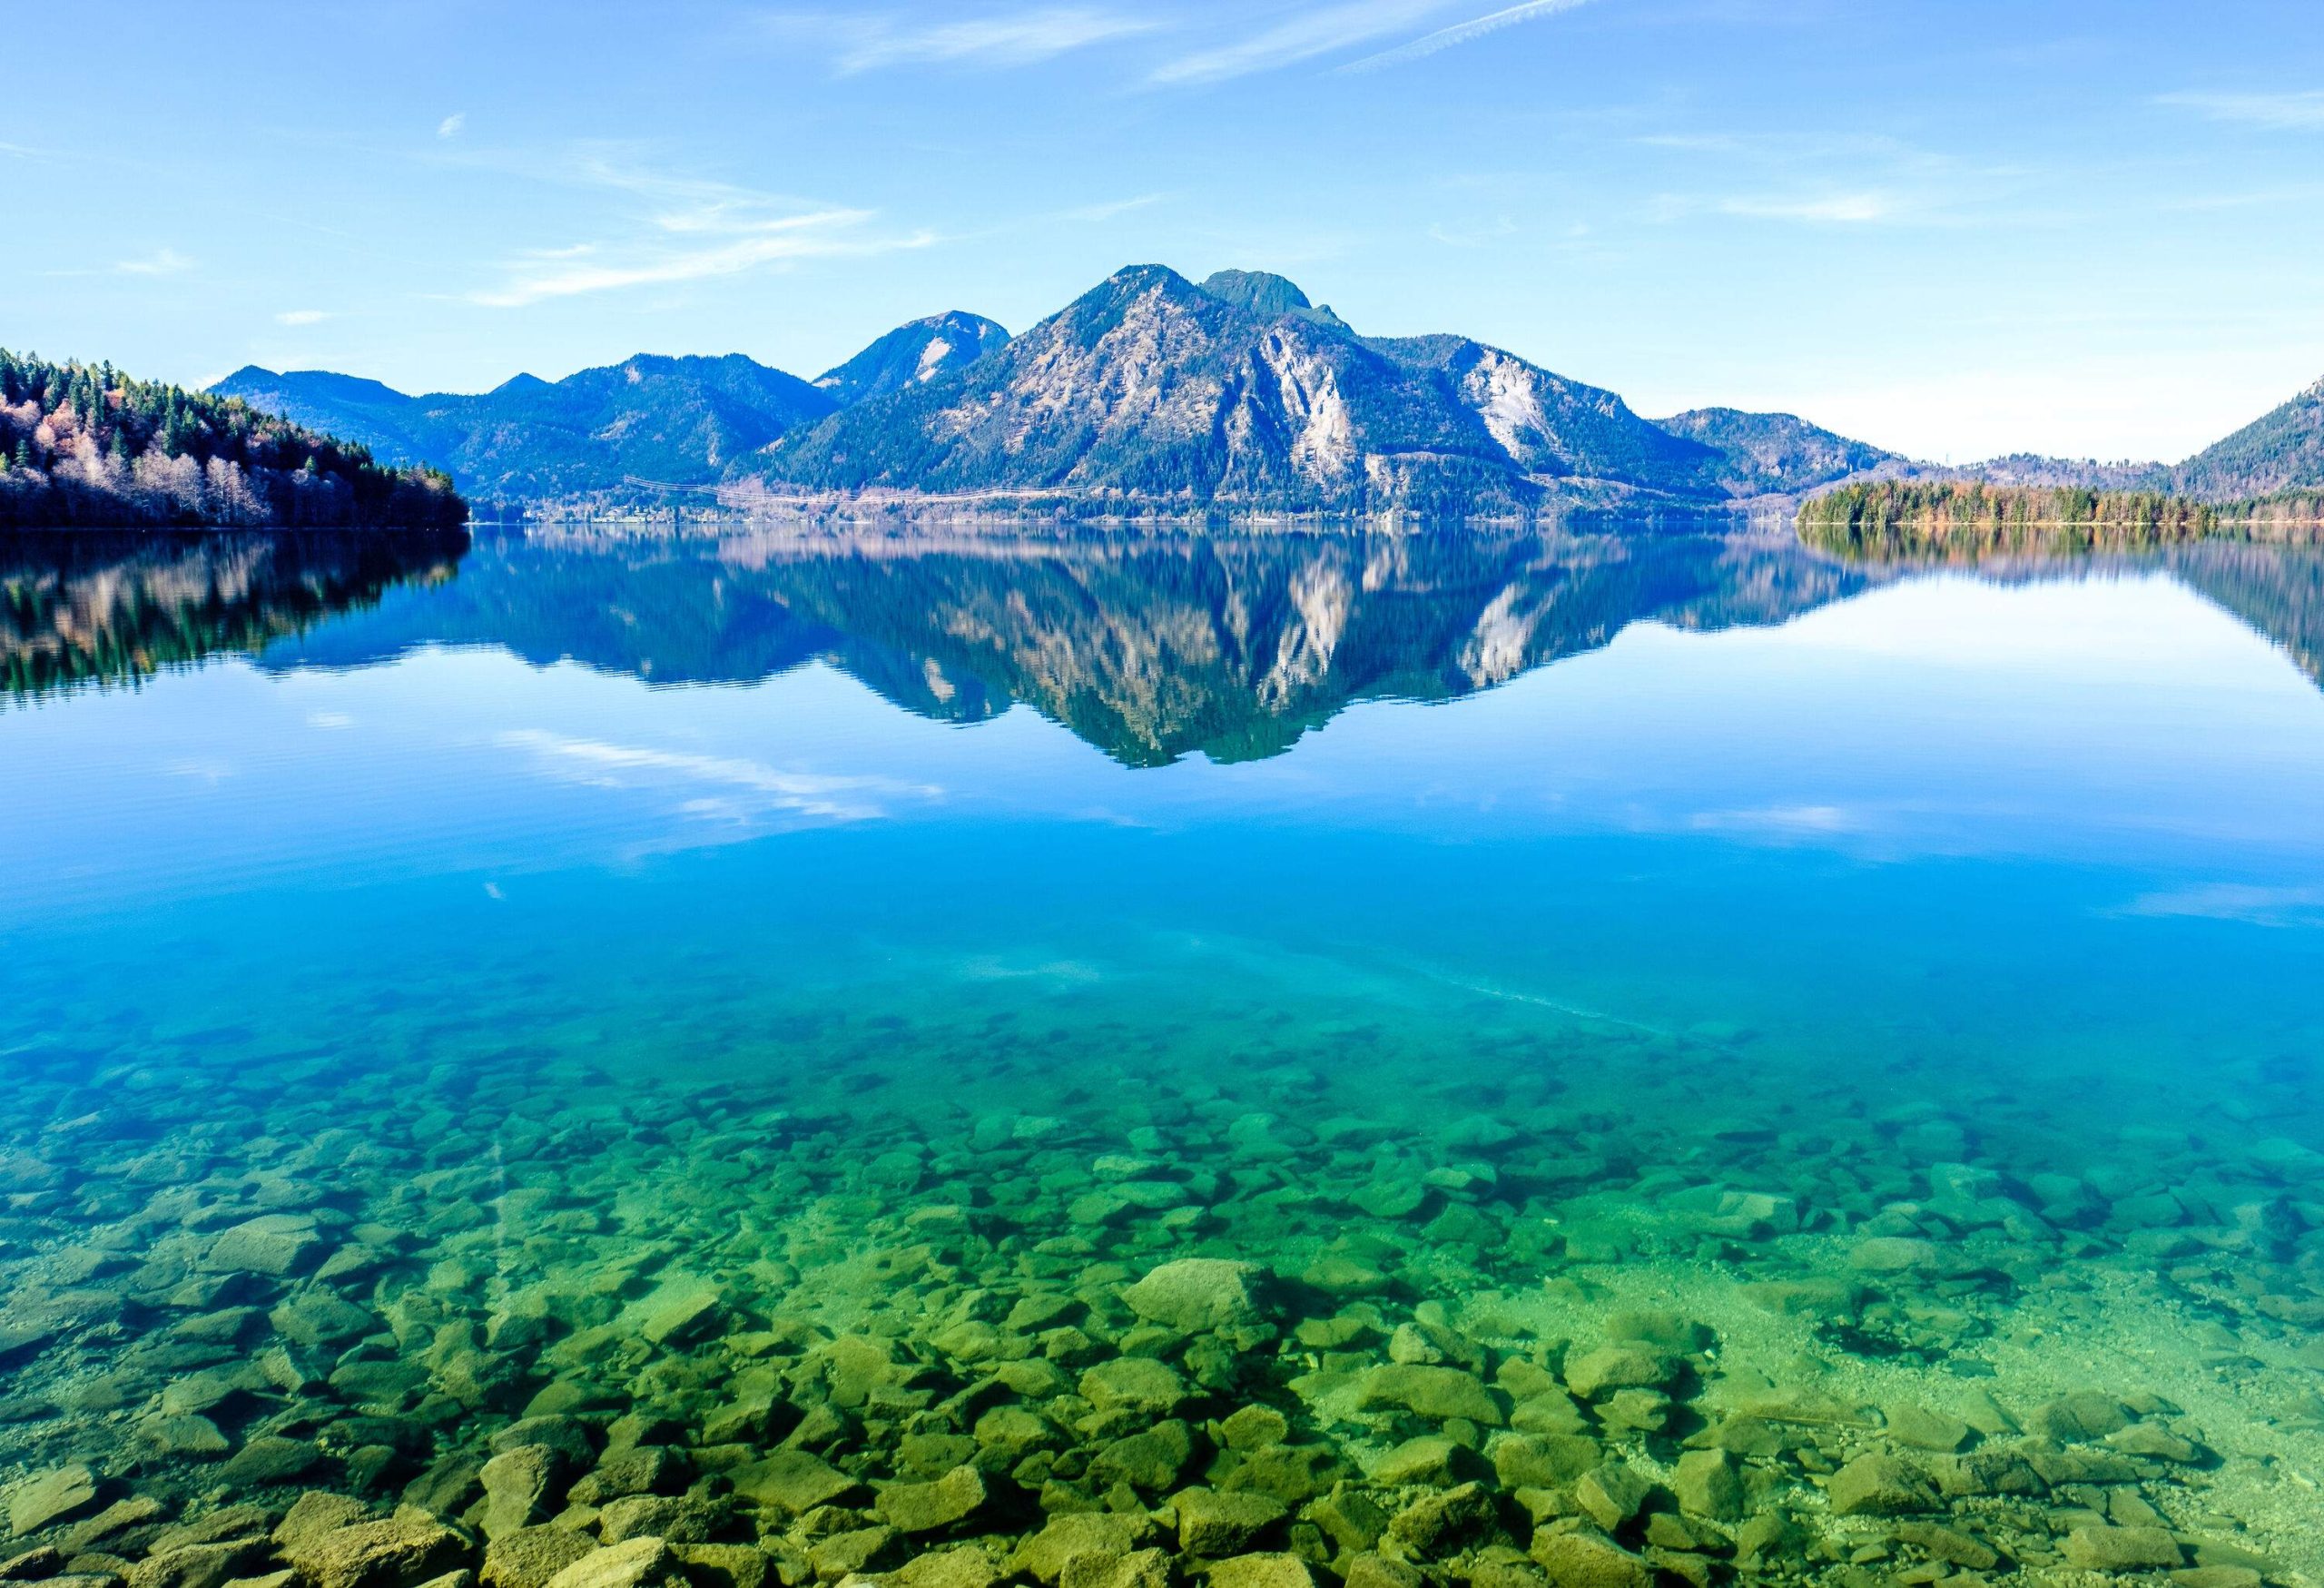 A serene rocky lake reflects the forested mountain range and the clear blue sky.